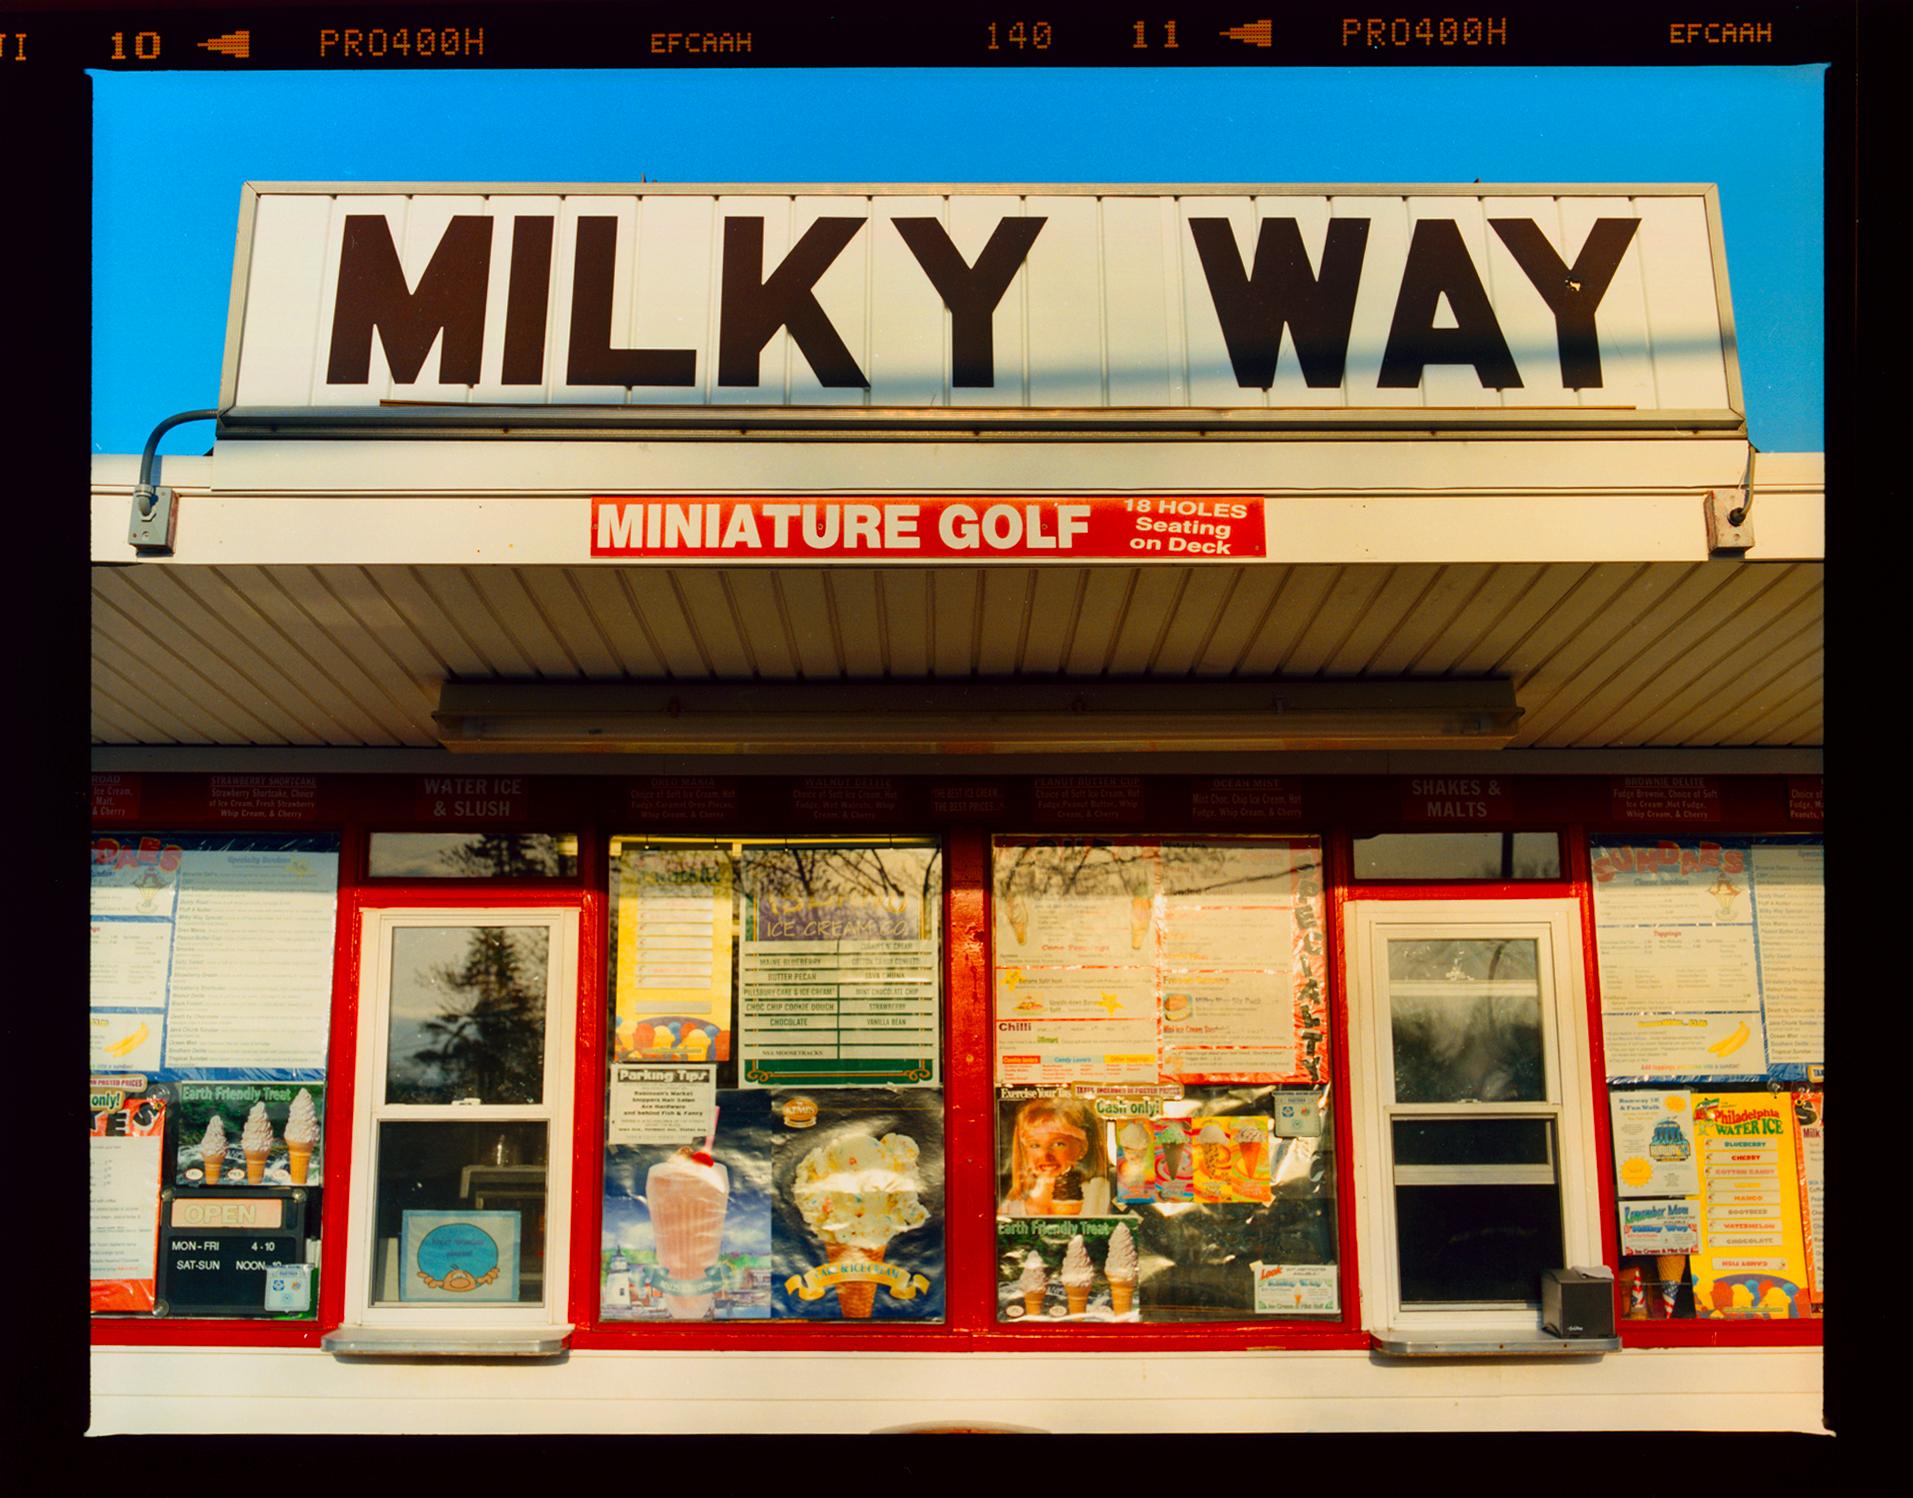 Richard Heeps Color Photograph - Milky Way, New Jersey - American Color Street Photography